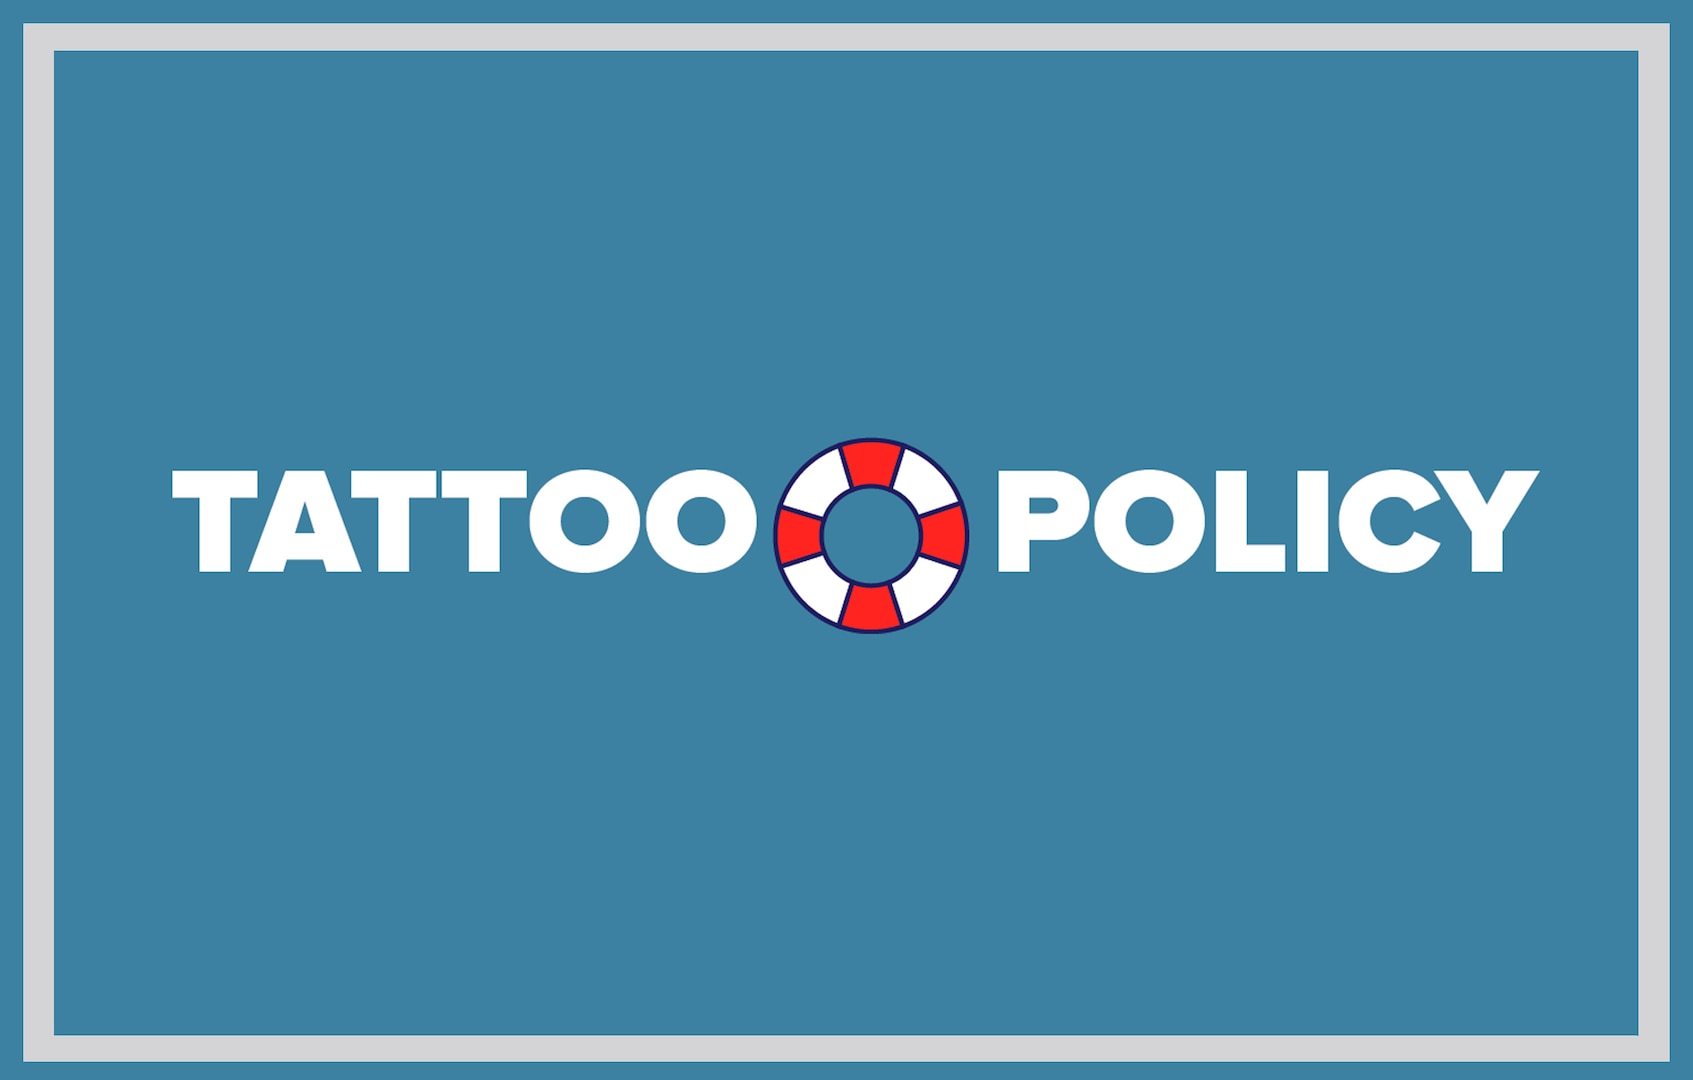 Updated Tattoo Policy